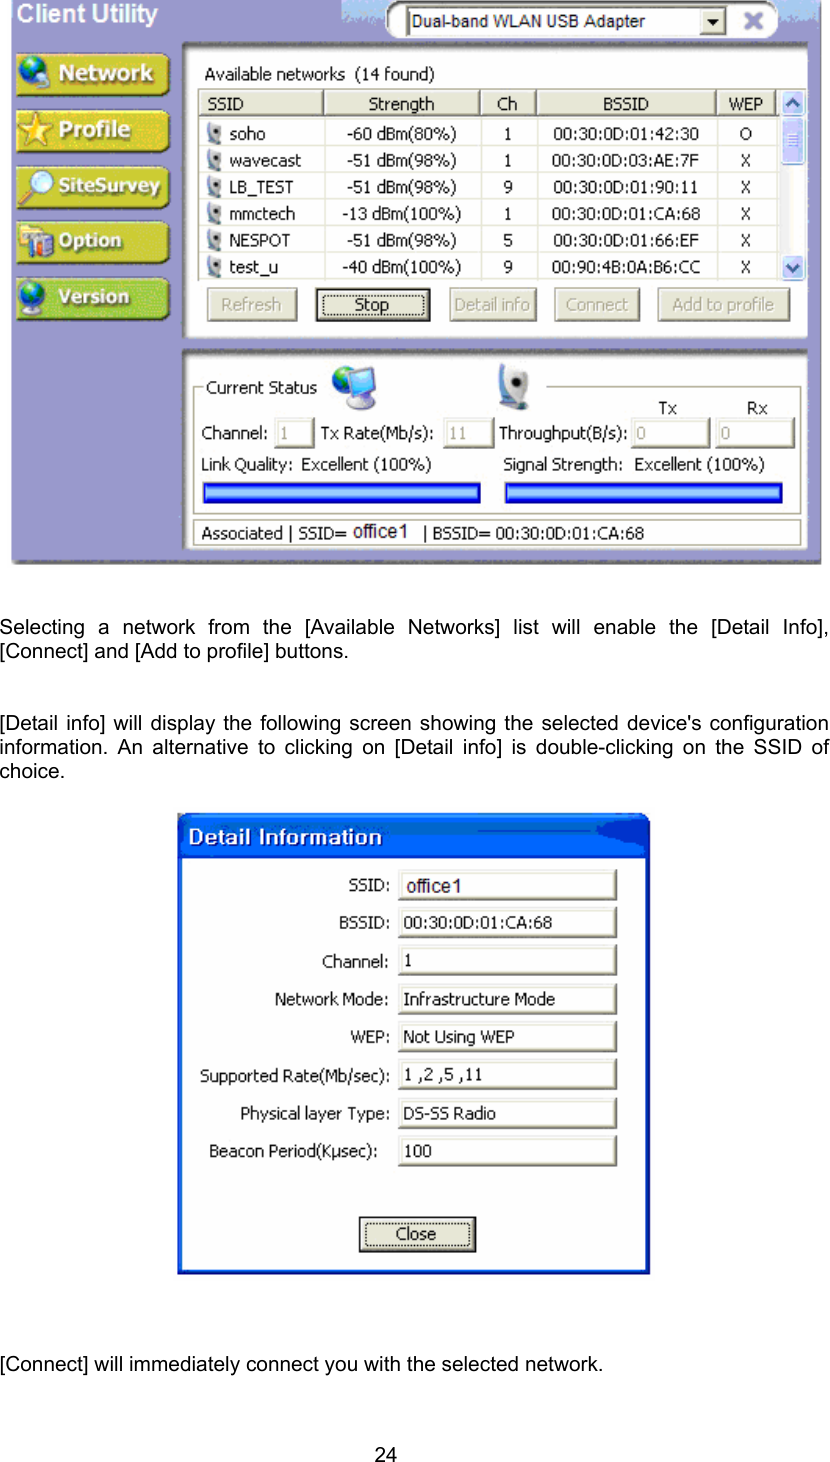  24      Selecting a network from the [Available Networks] list will enable the [Detail Info], [Connect] and [Add to profile] buttons.   [Detail info] will display the following screen showing the selected device&apos;s configuration information. An alternative to clicking on [Detail info] is double-clicking on the SSID of choice.       [Connect] will immediately connect you with the selected network. 